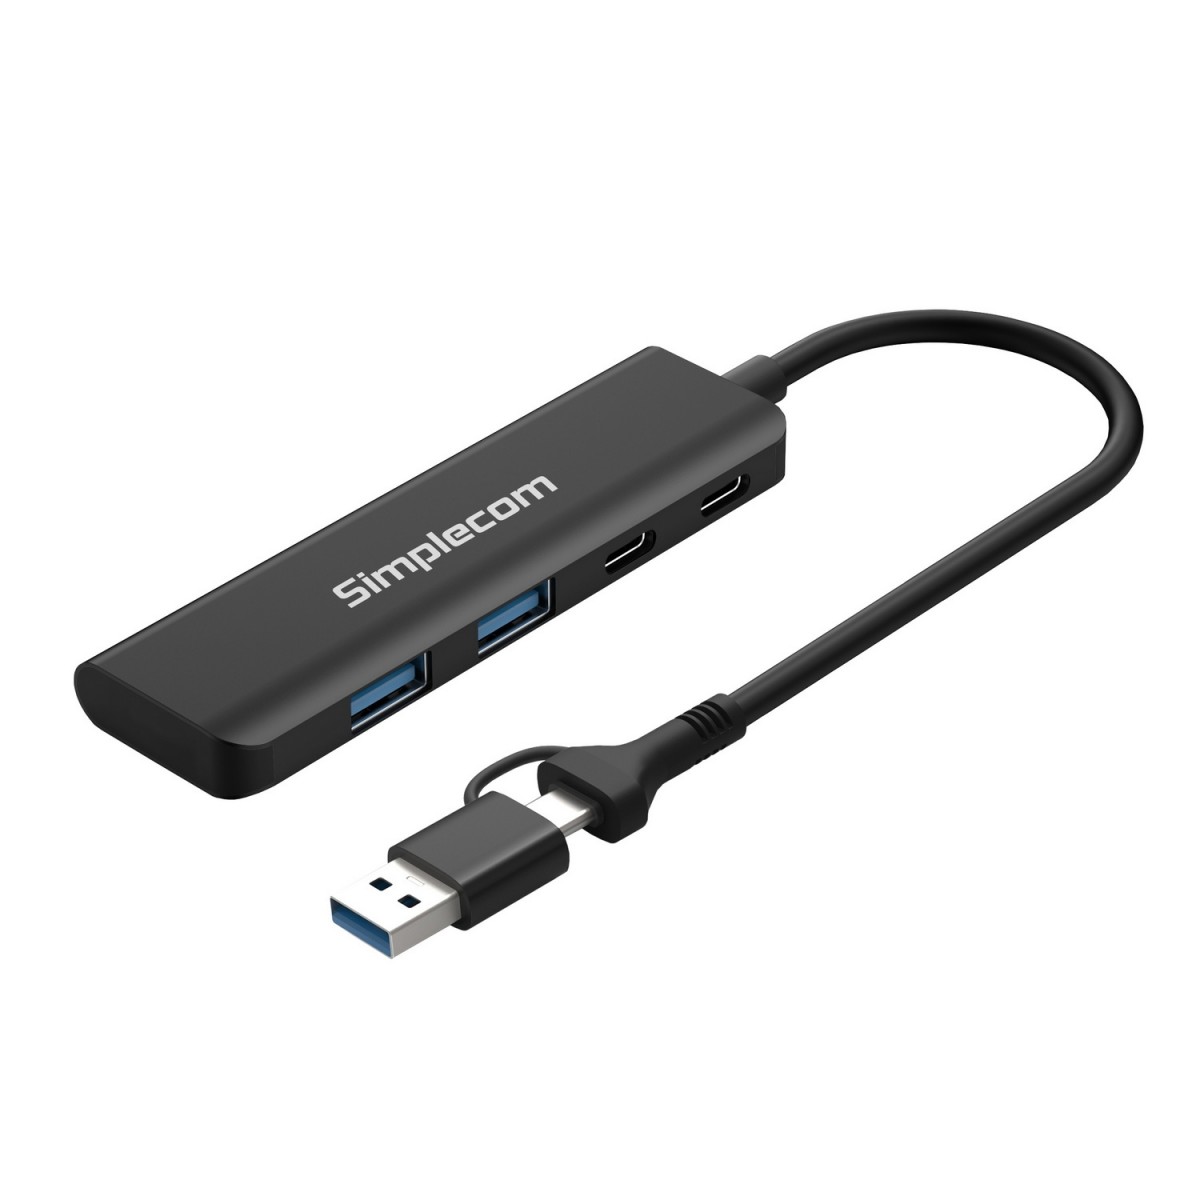  SuperSpeed USB-A and USB Type-C 4-Port Combo Hub USB 3.2 Gen 1 (2x USB-A and 2x USB Type-C Ports)  